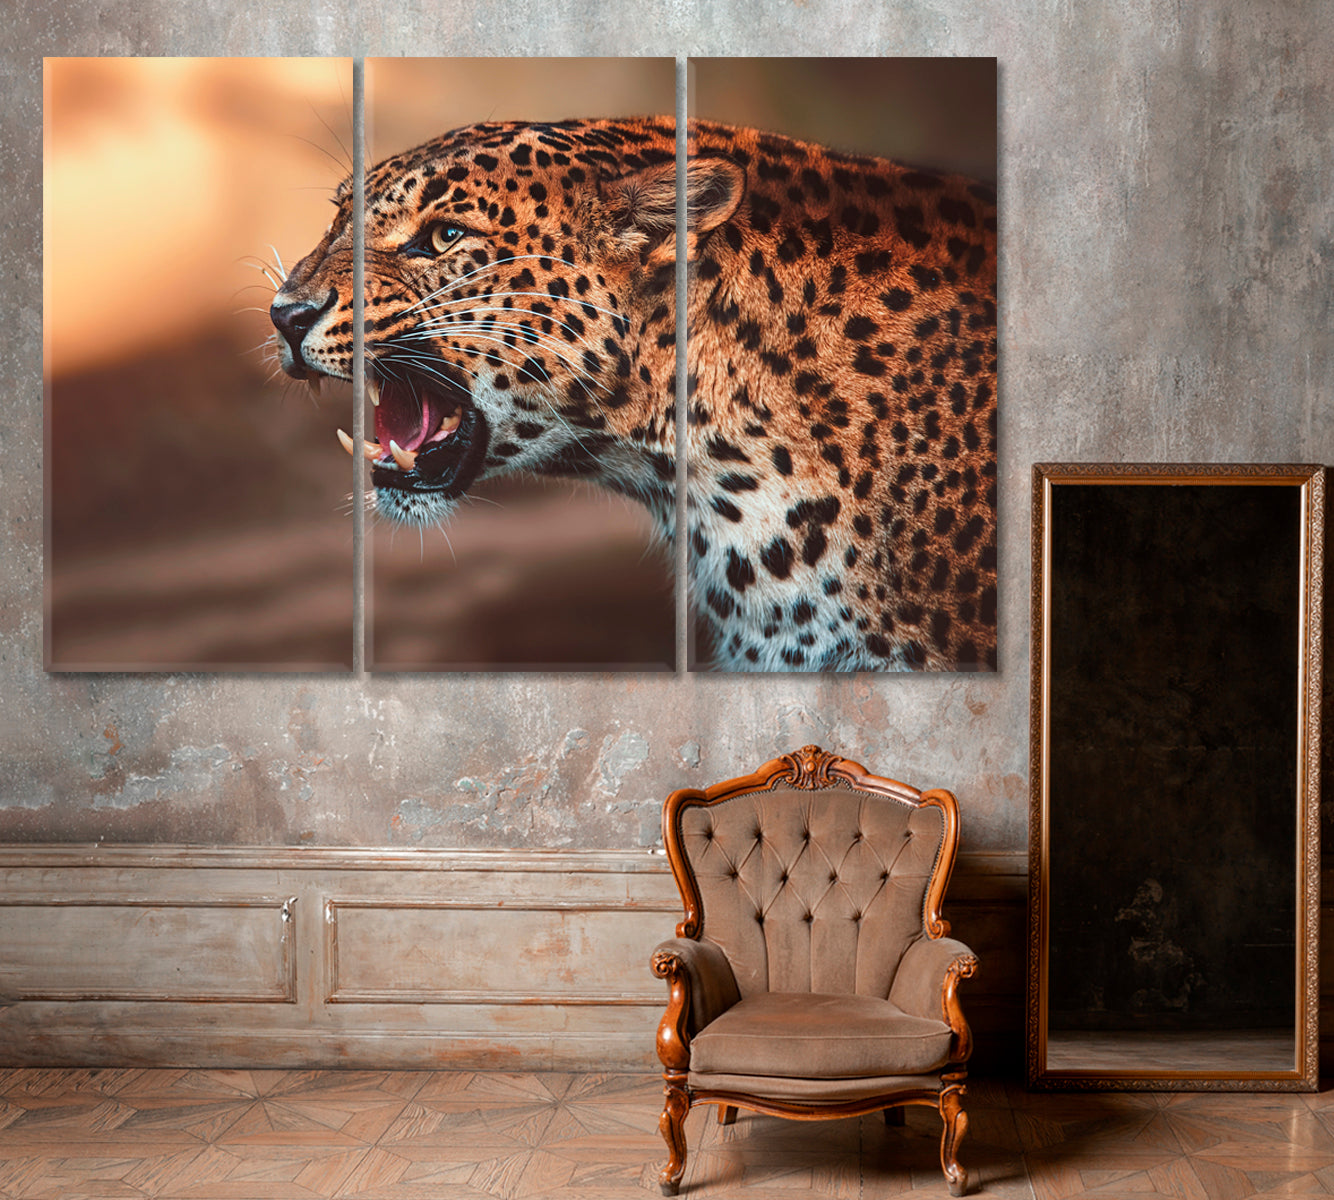 Angry Ceylon Leopard Canvas Print ArtLexy 3 Panels 36"x24" inches 